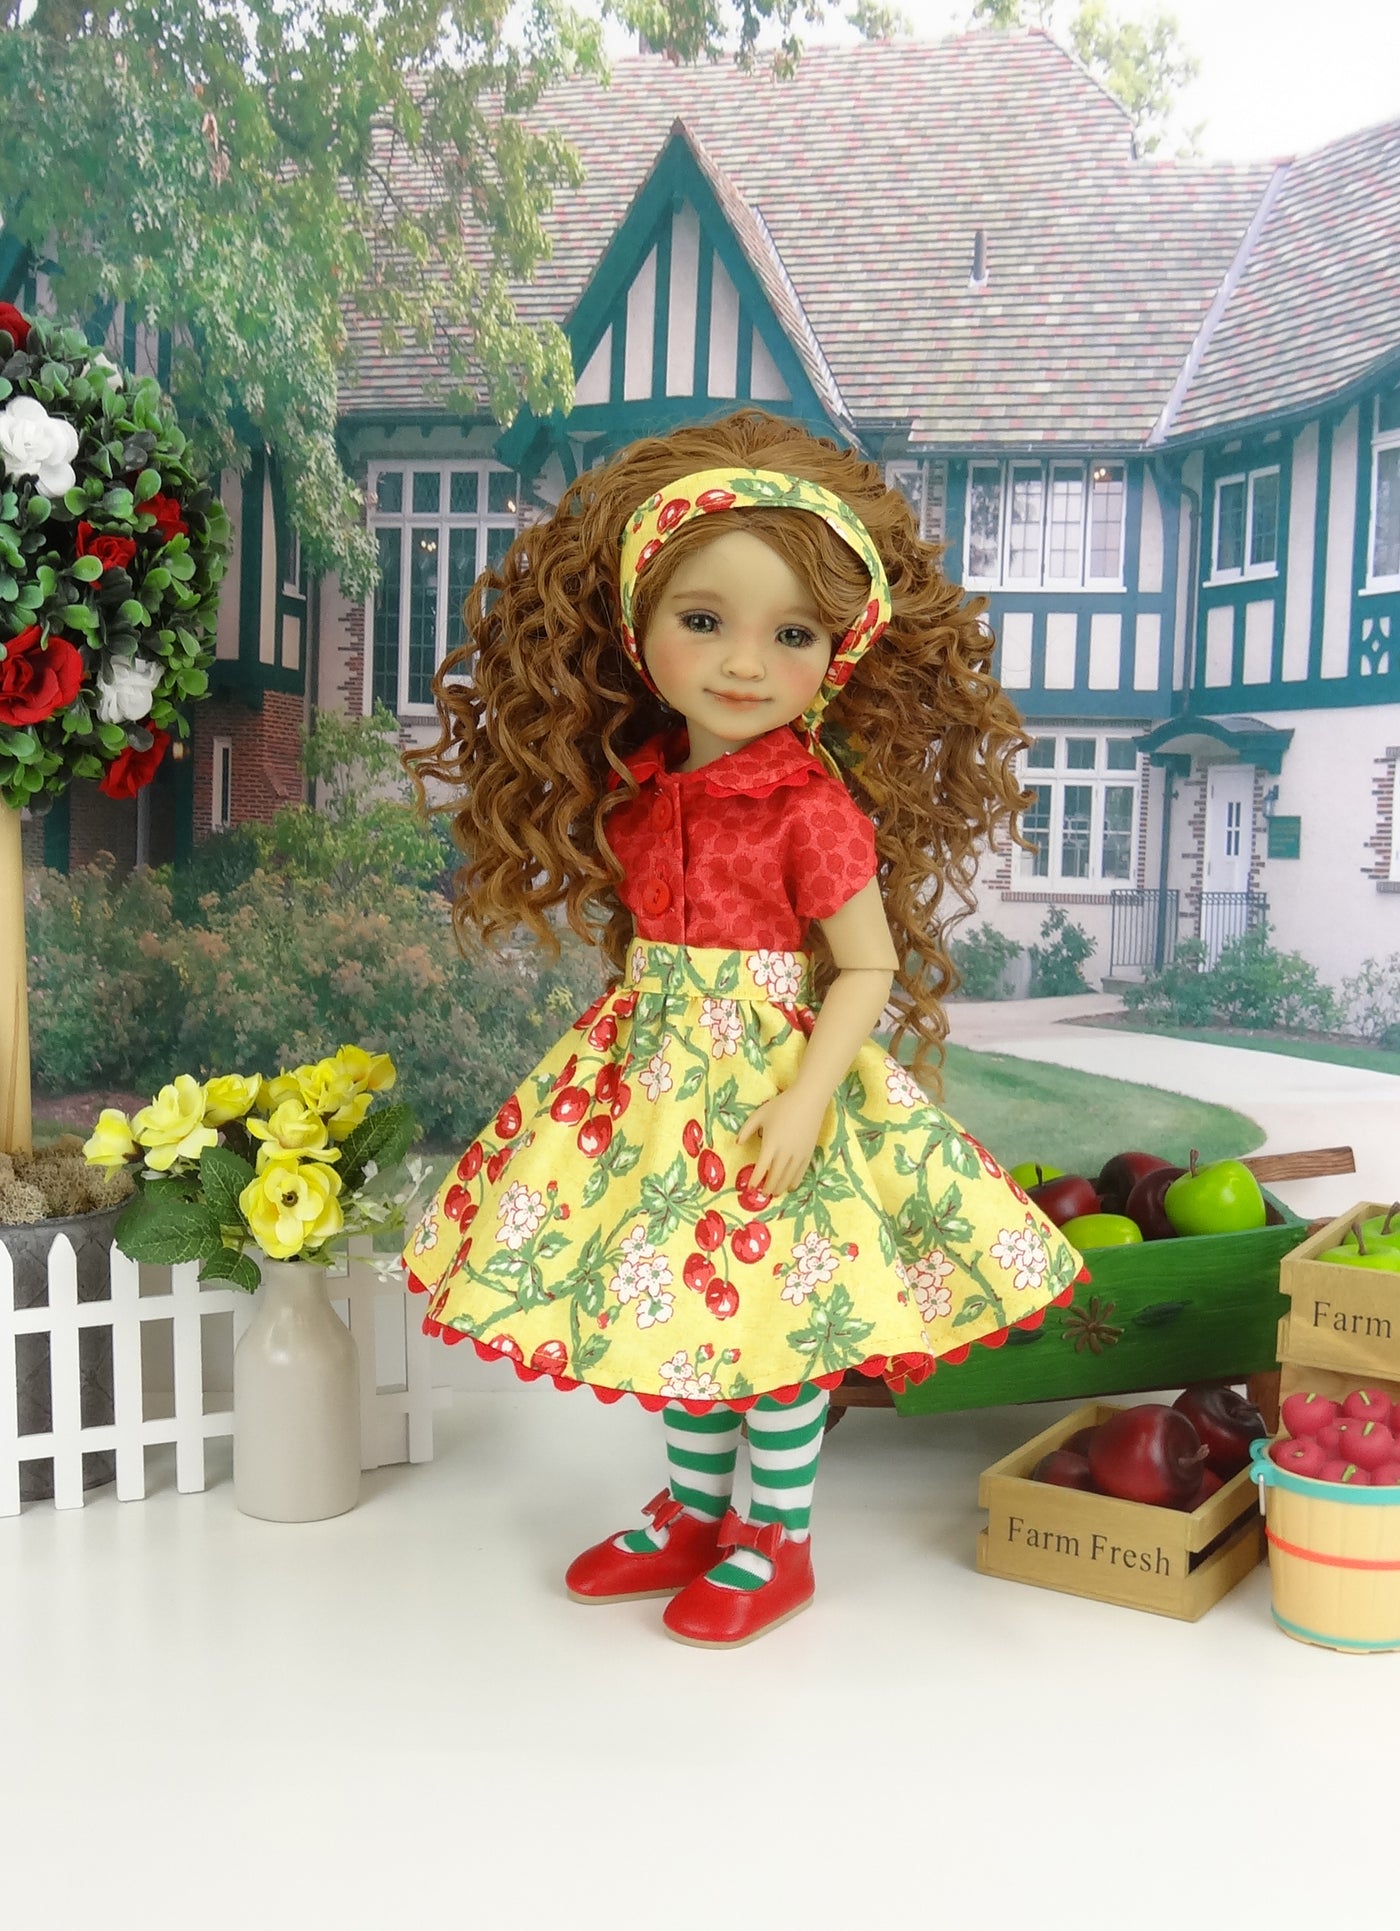 Cherry Pickin' - blouse & skirt with shoes for Ruby Red Fashion Friends doll